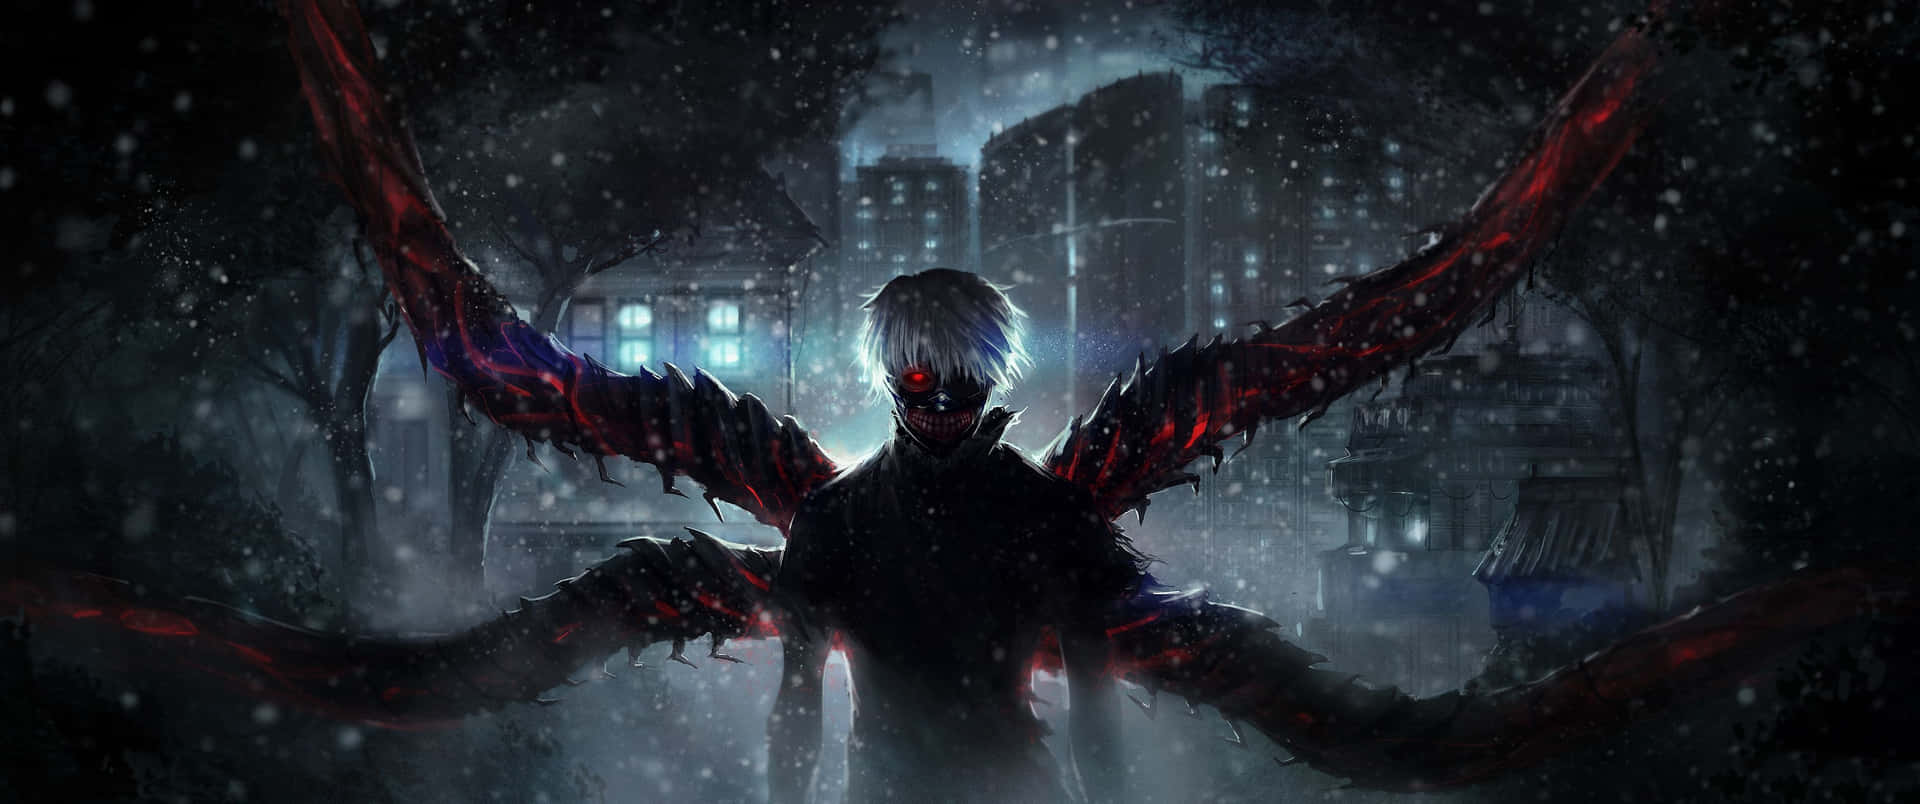 3440x1440 Game Tokyo Ghoul Background